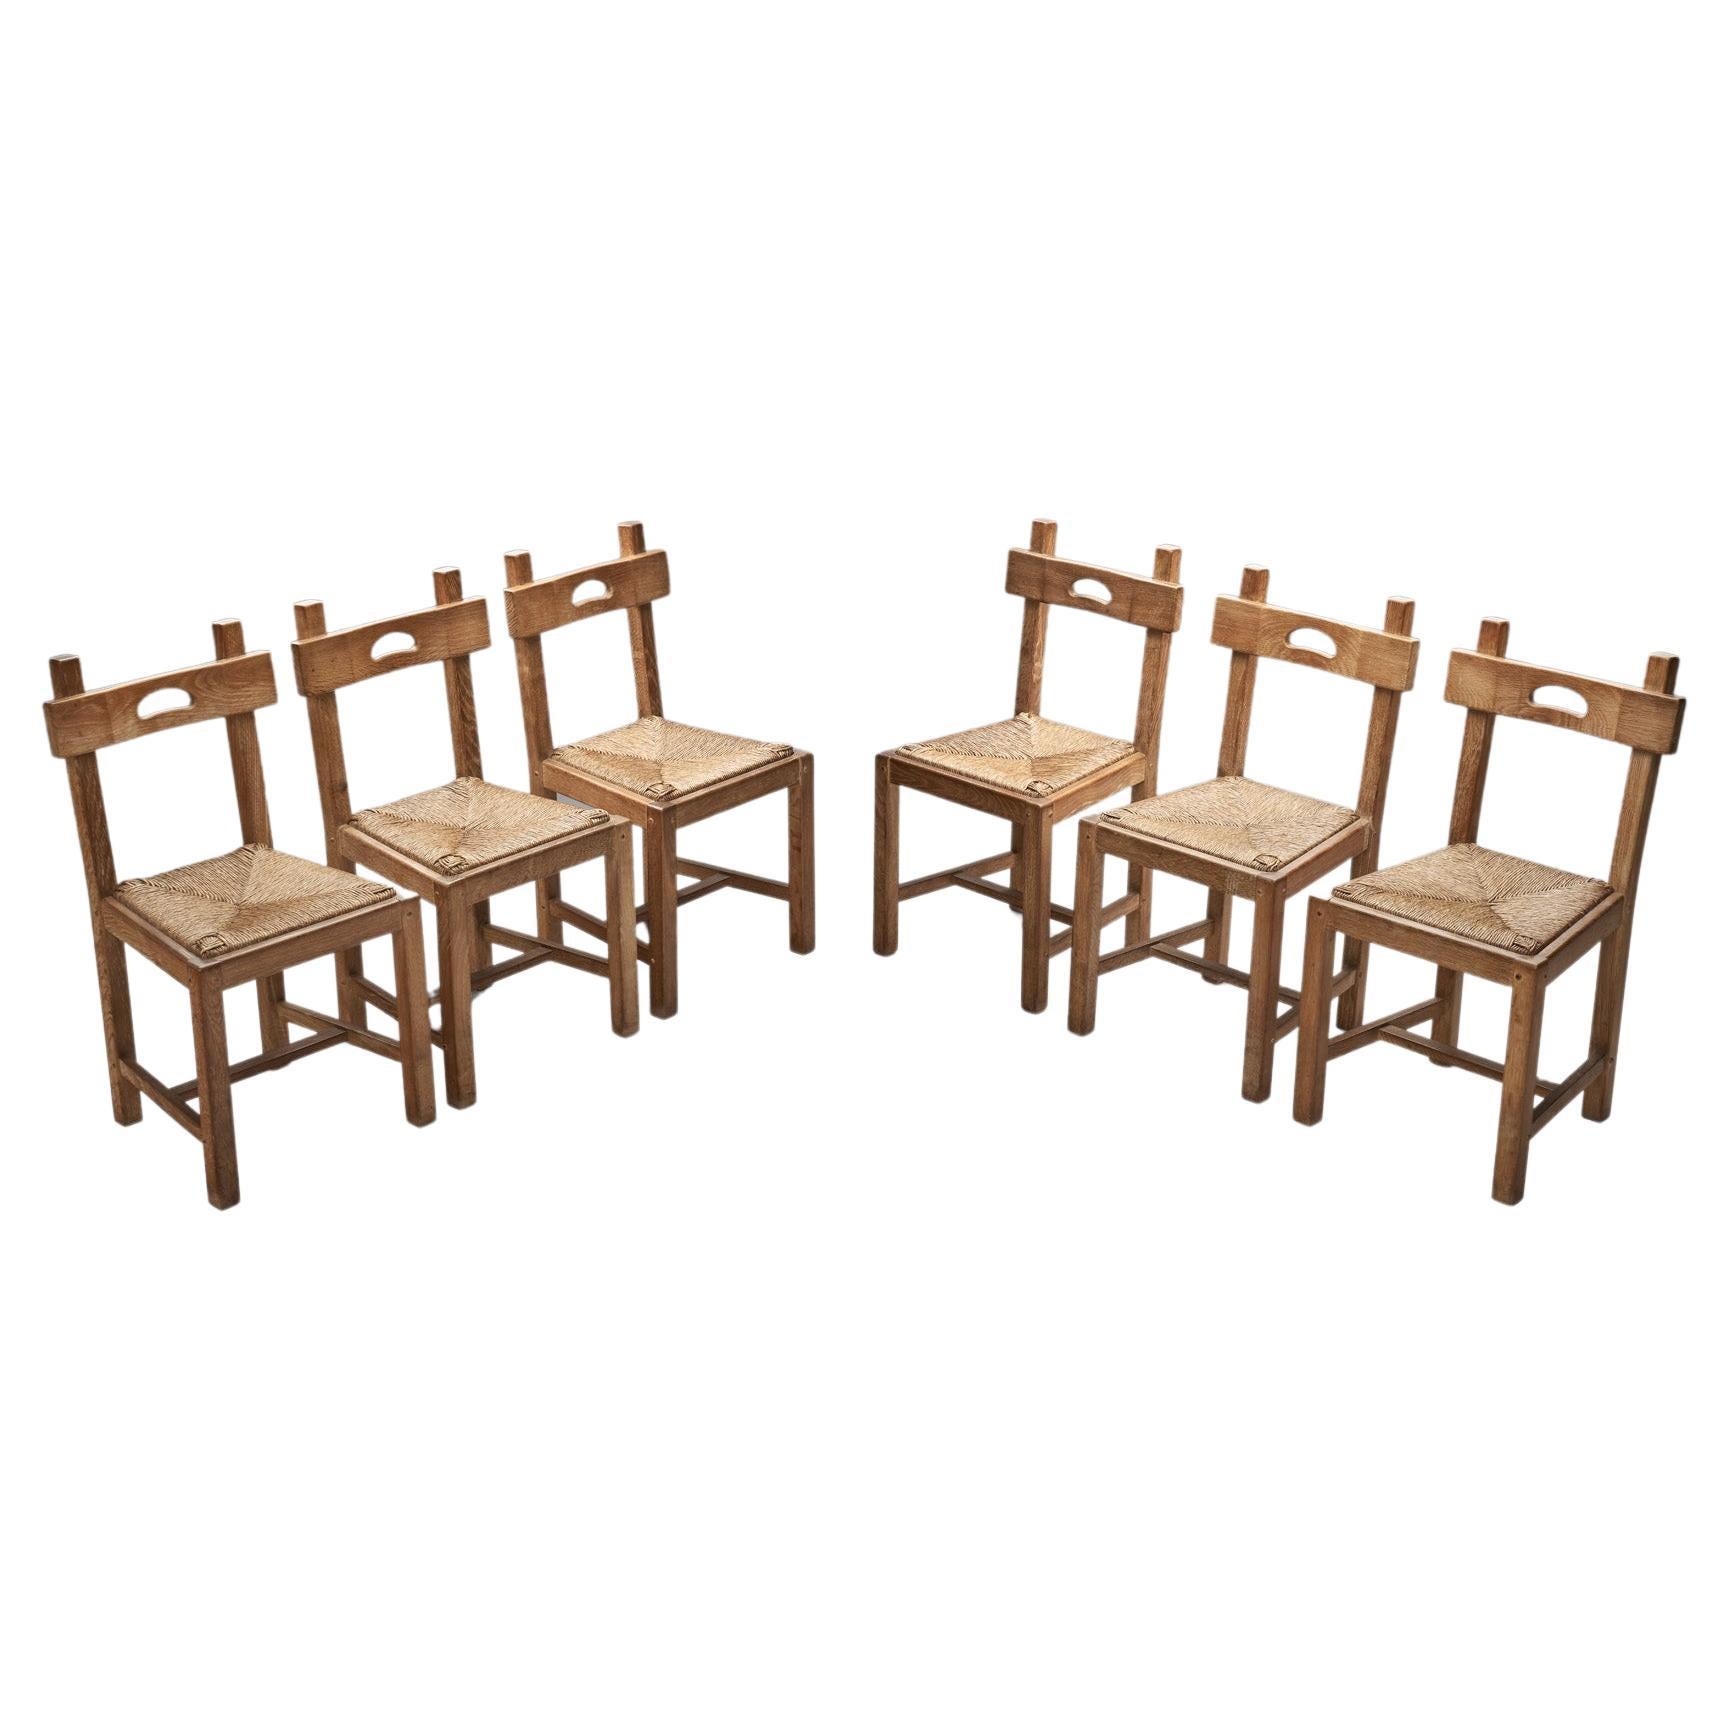 Rush and Wood Rustic Dining Chair Set, Europe, ca 1950s For Sale